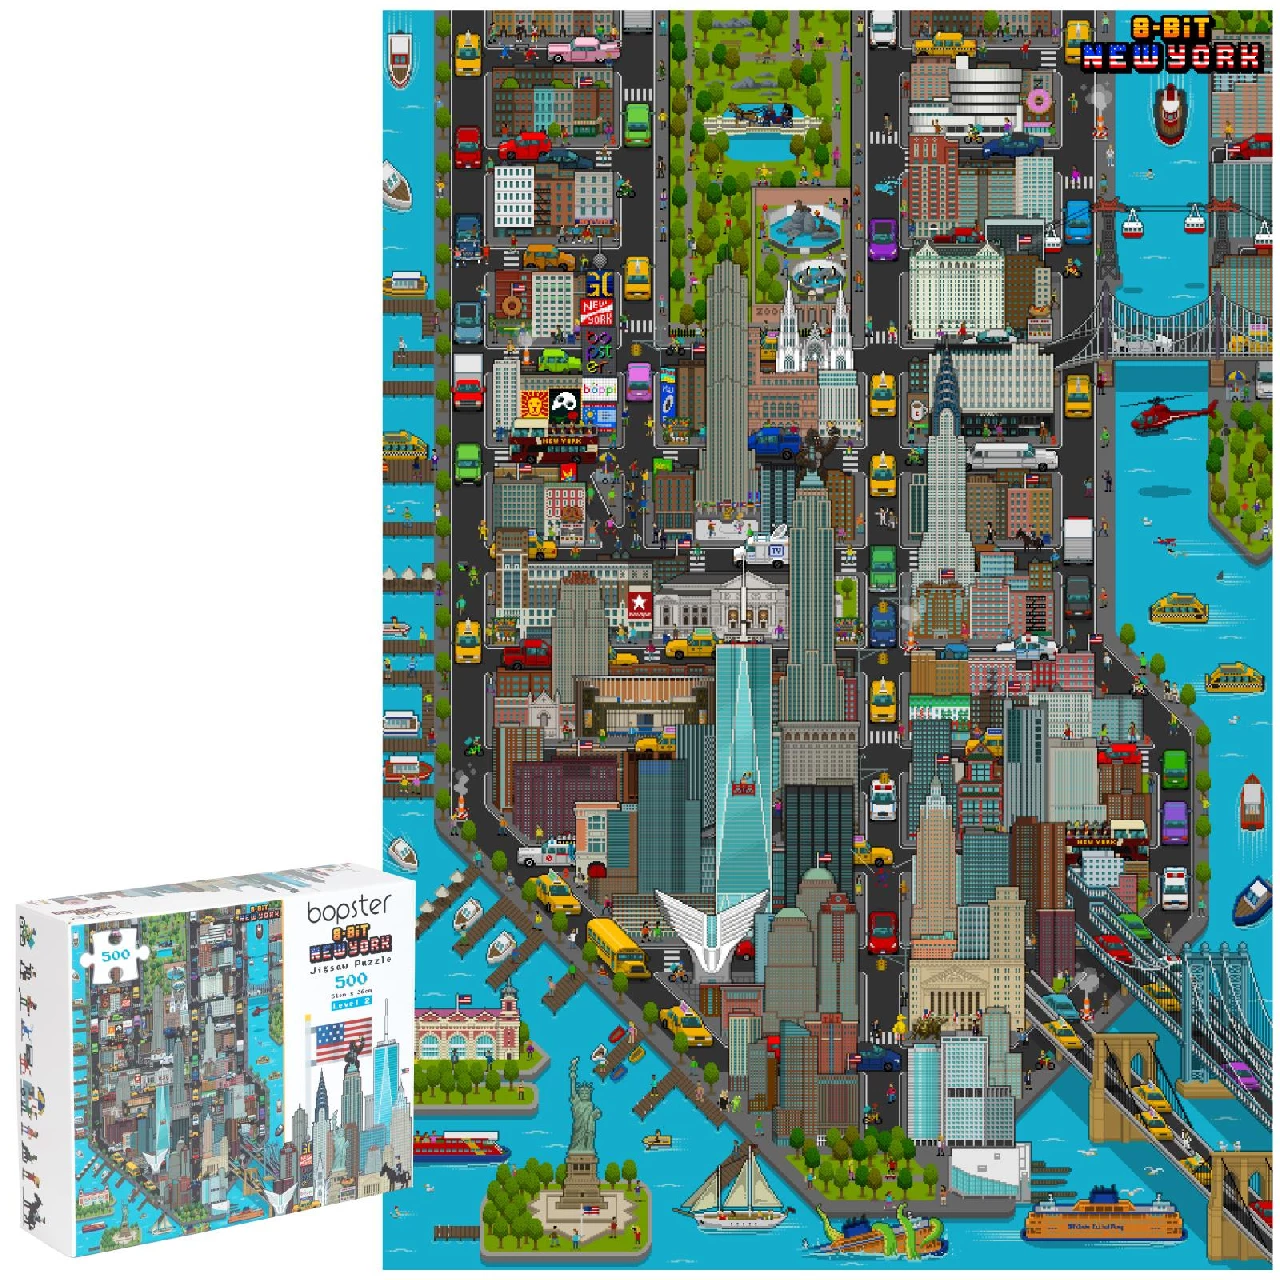 bopster 8-bit New York Pixel Jigsaw Puzzle 500 Pieces for Kids Teens and Adults 51 x 36cm Level 2